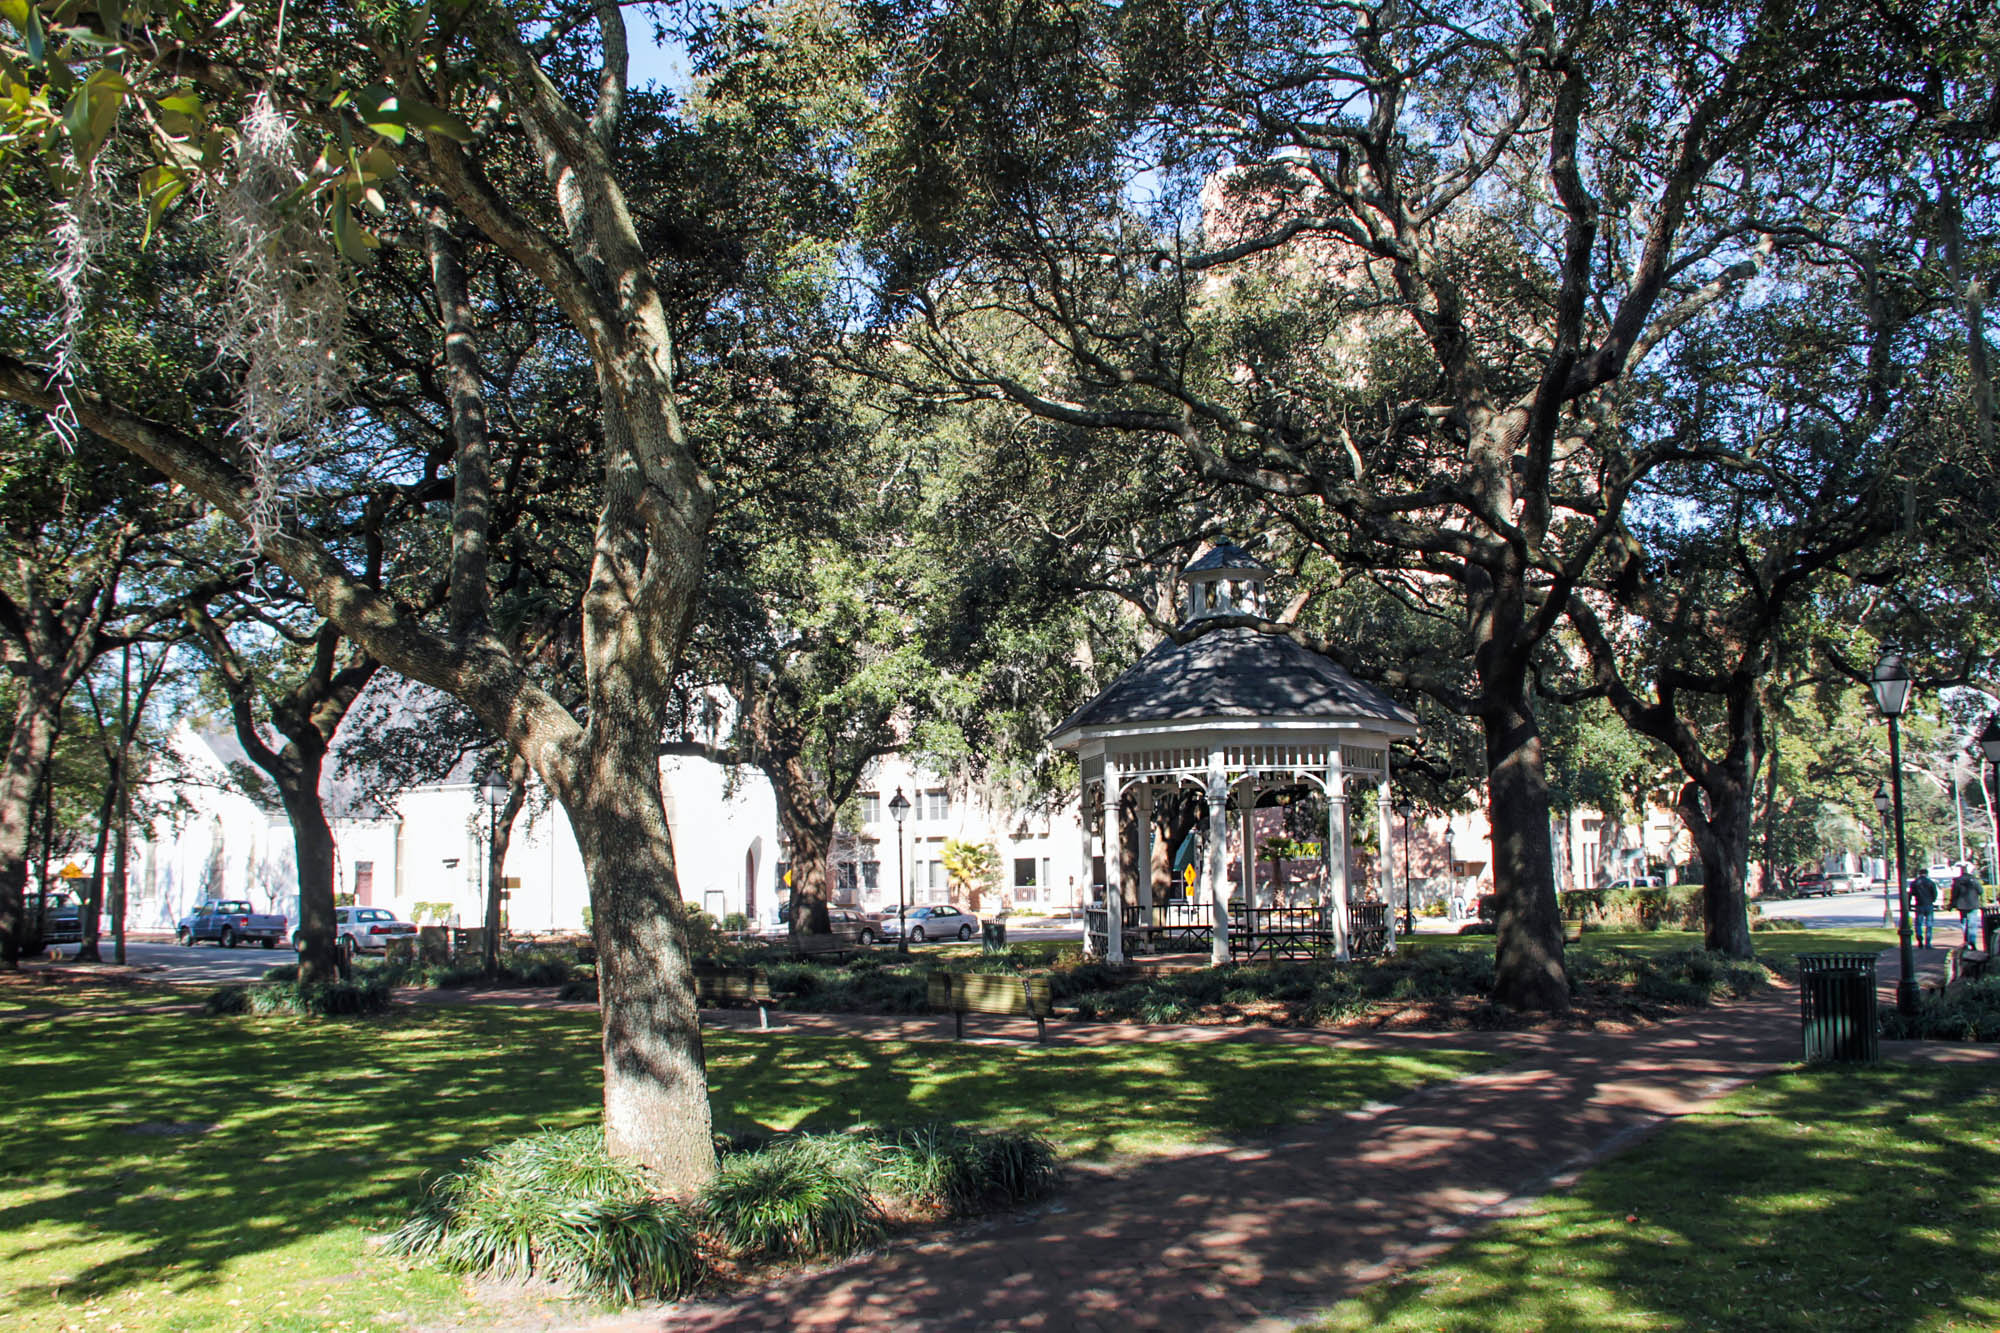 Whitefield Square trees in Savannah